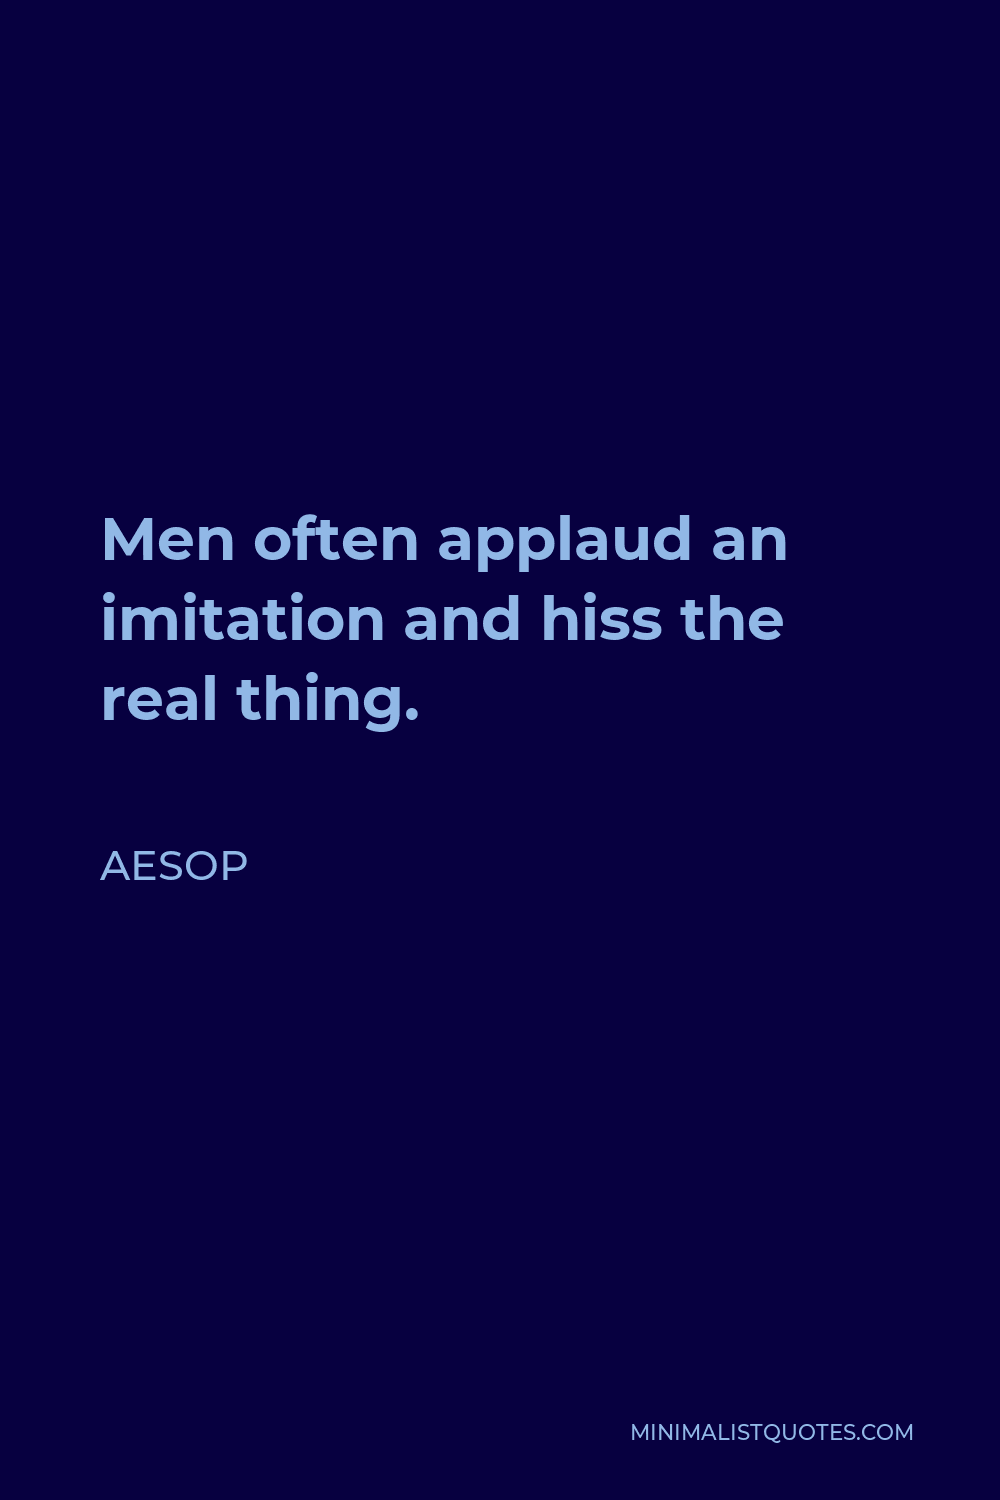 Aesop Quote - Men often applaud an imitation and hiss the real thing.